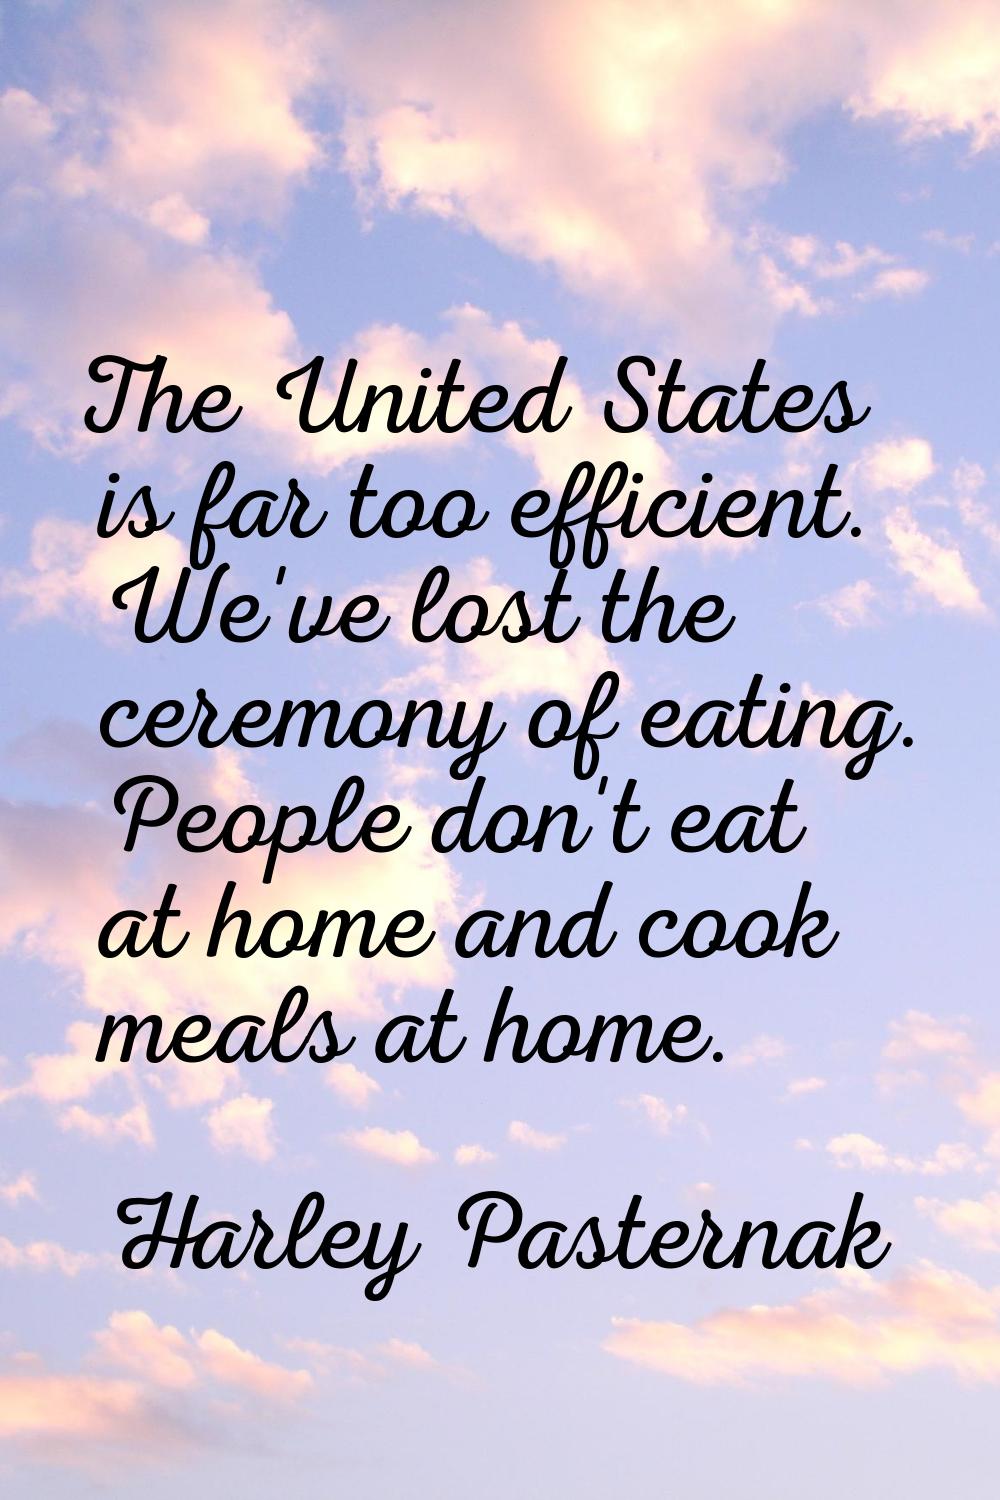 The United States is far too efficient. We've lost the ceremony of eating. People don't eat at home